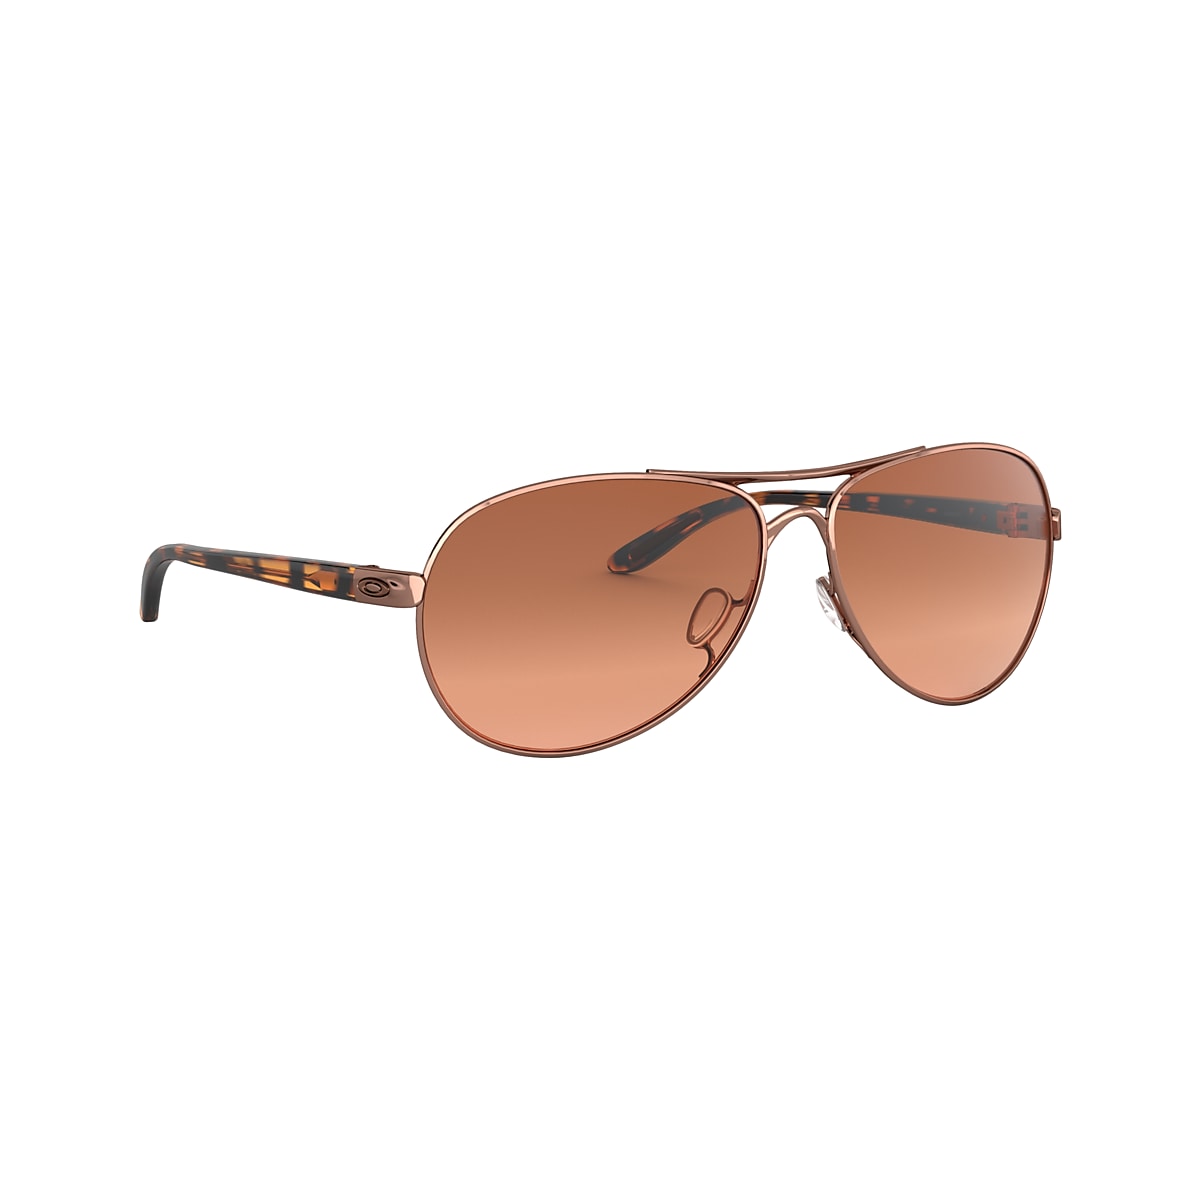 Oakley 0OO4079 Sunglasses in Gold | Target Optical